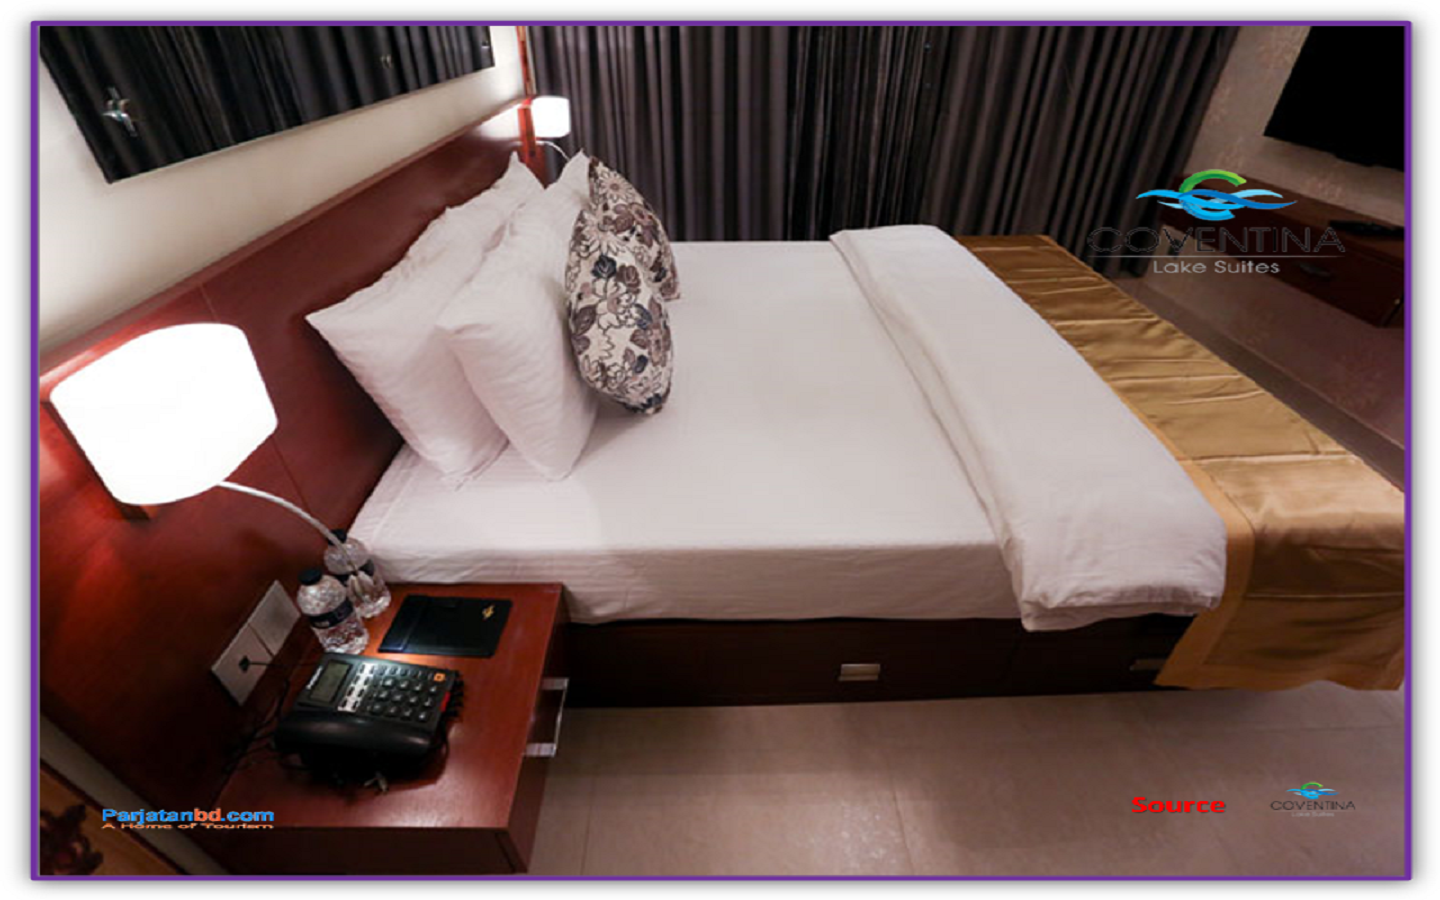 Room Super Deluxe -1, Coventina Lake Suites- Serviced Apartments, Banani